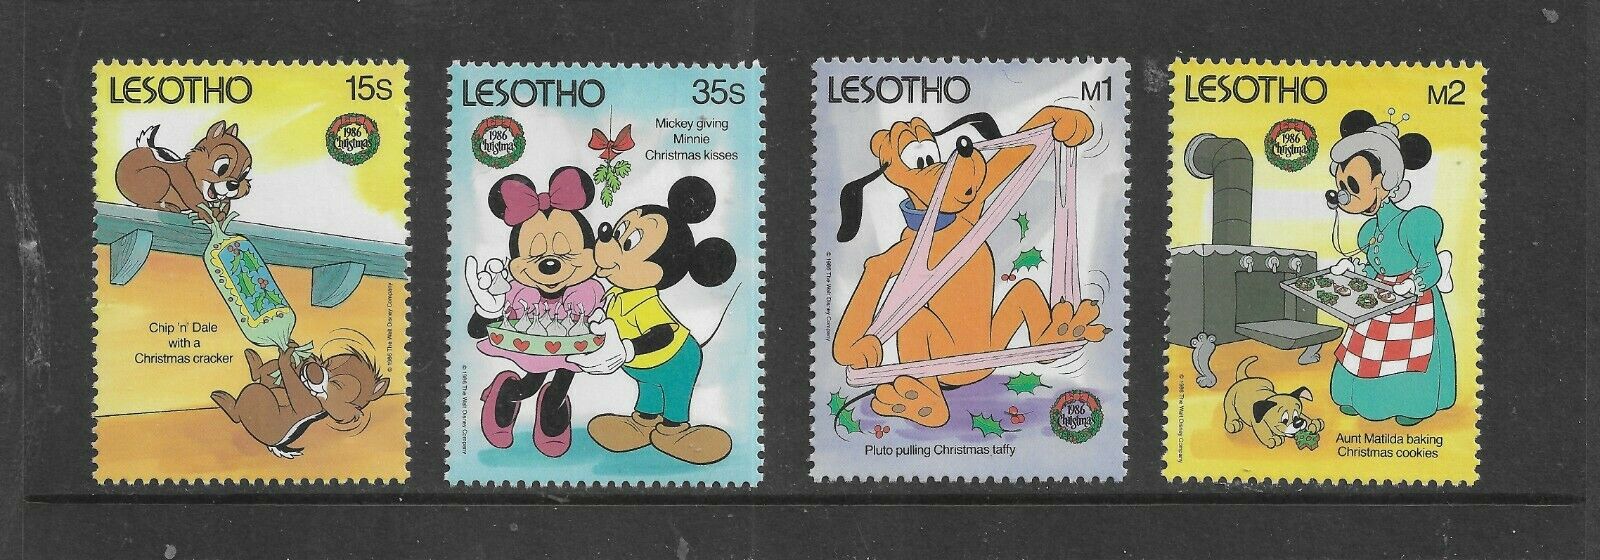 Hick Girl- Beautiful Mint Lesotho Stamps     Disney   Mickey & Friends      C103